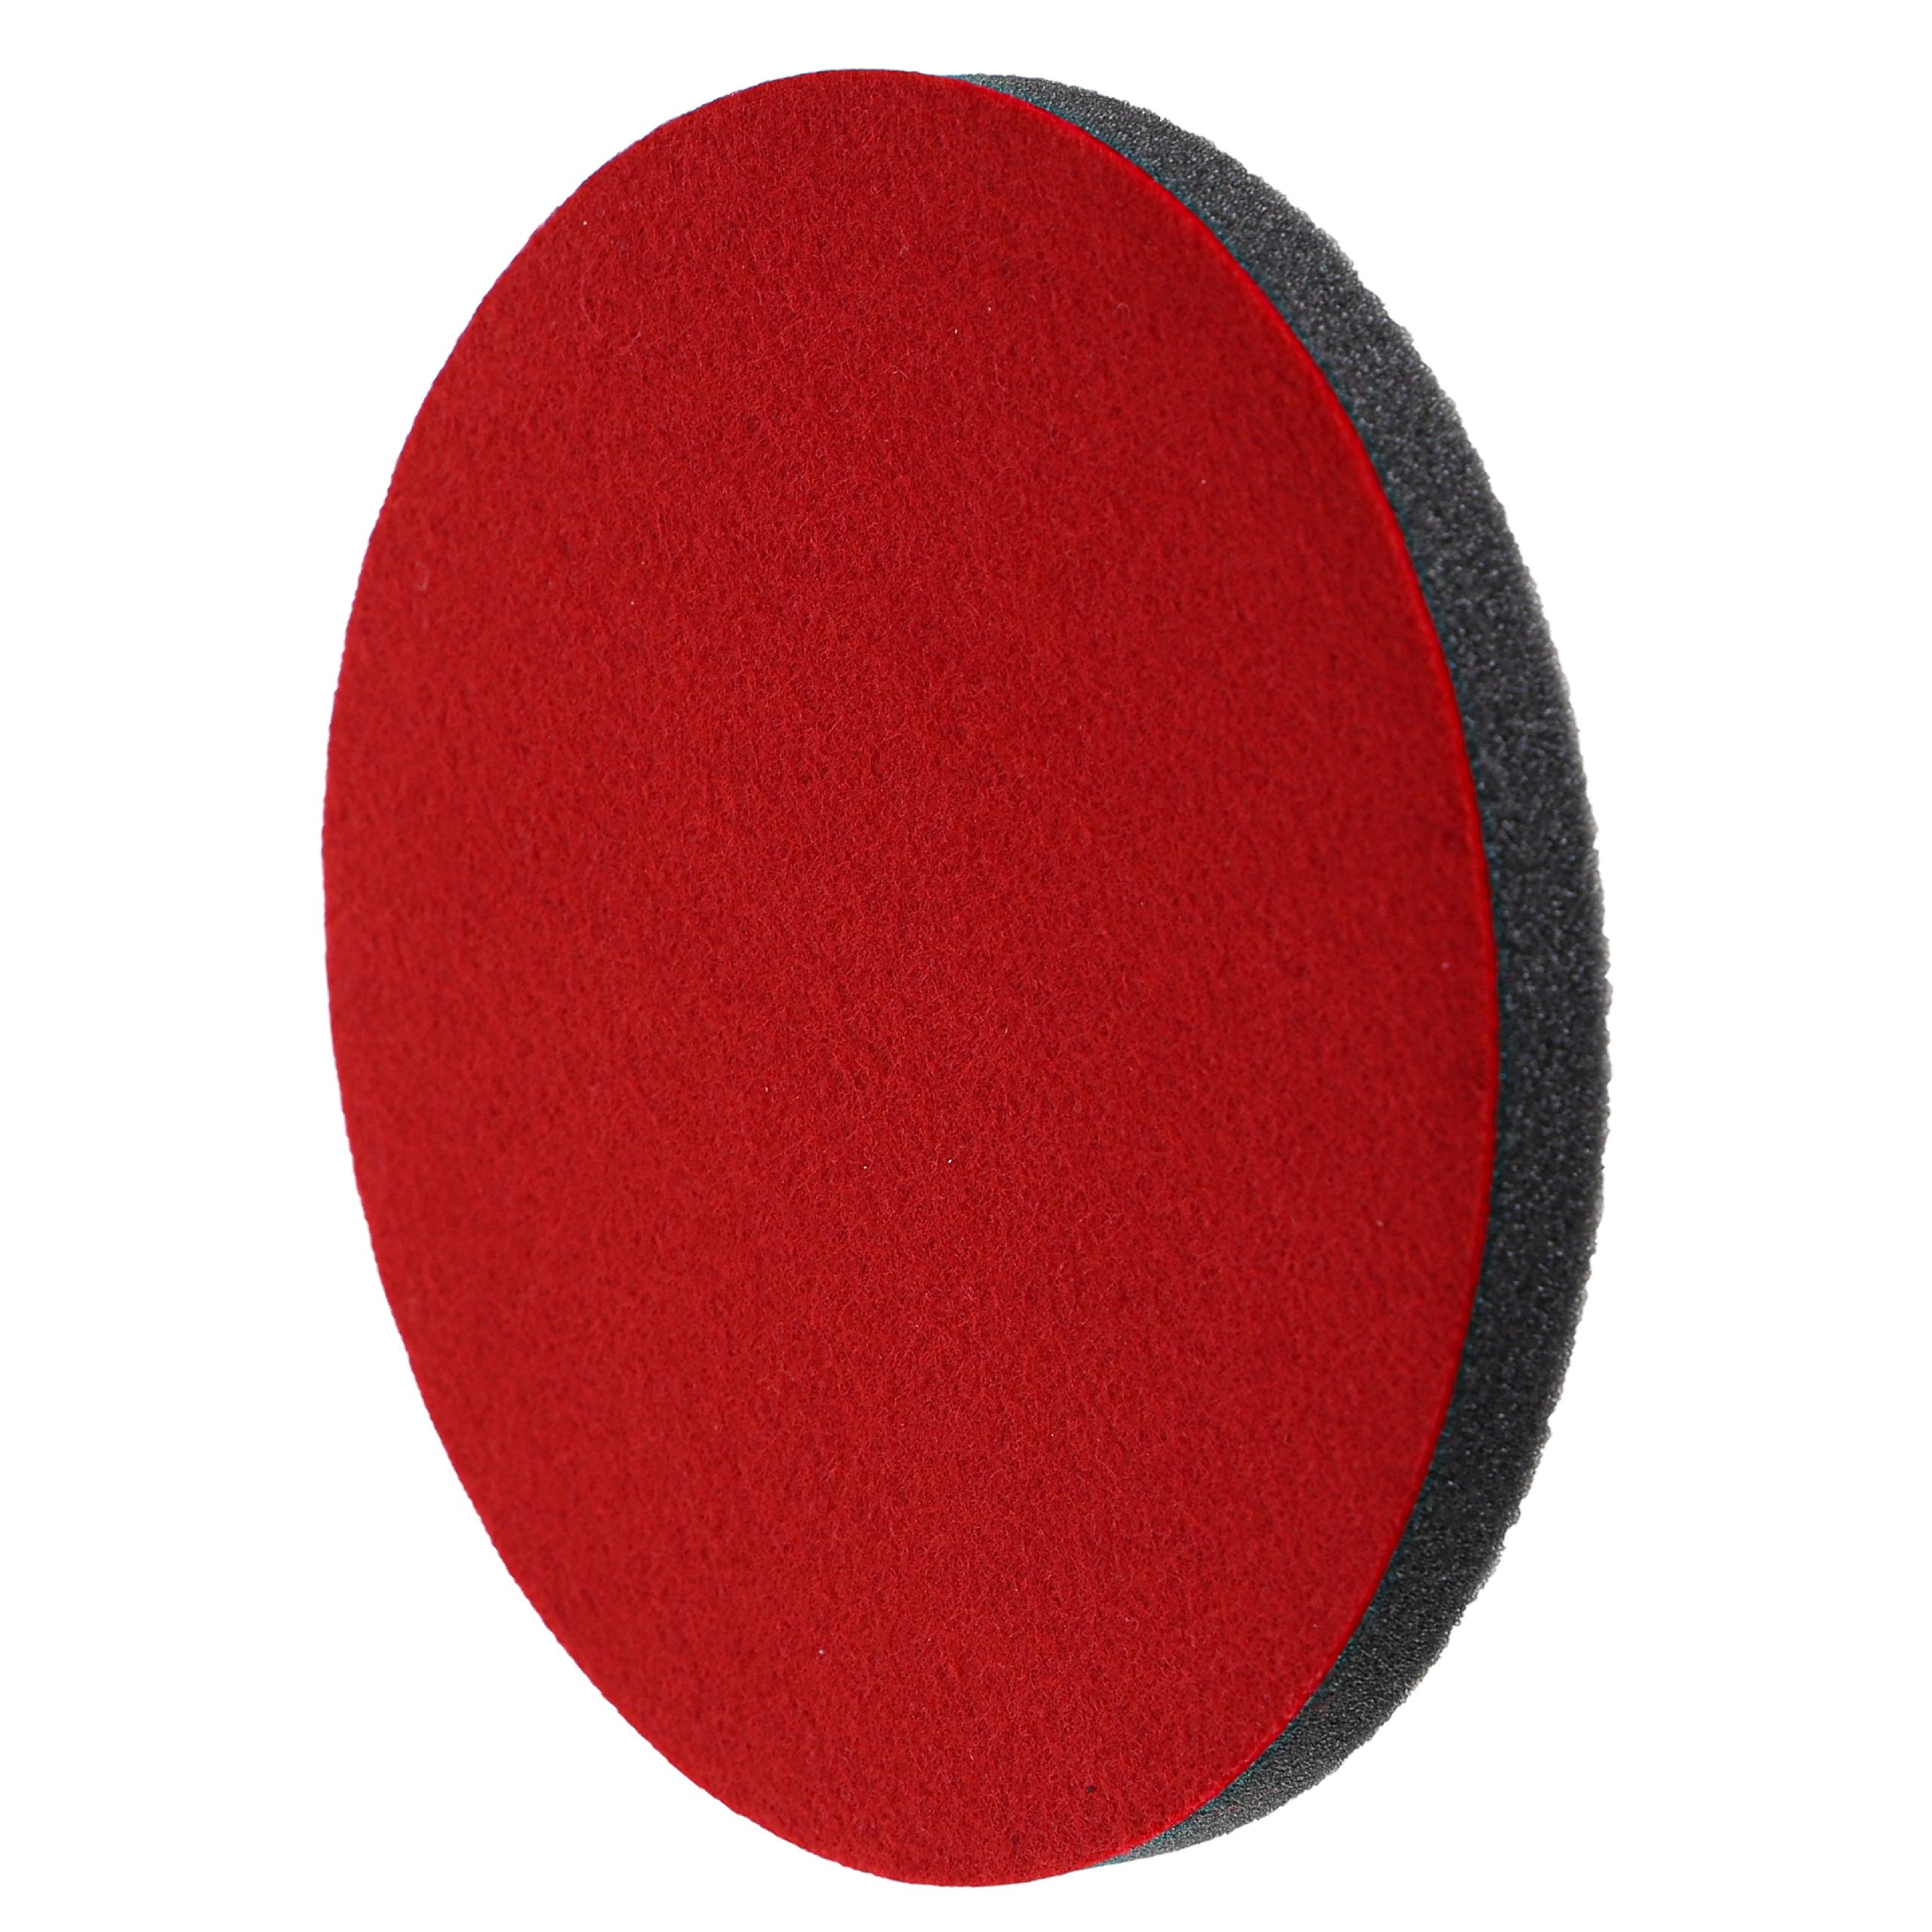 Polishing Pad as Replacement for Bosch 2609256052, 3165140386555 for Polishing Machines - 15 cm Diameter, 16 g